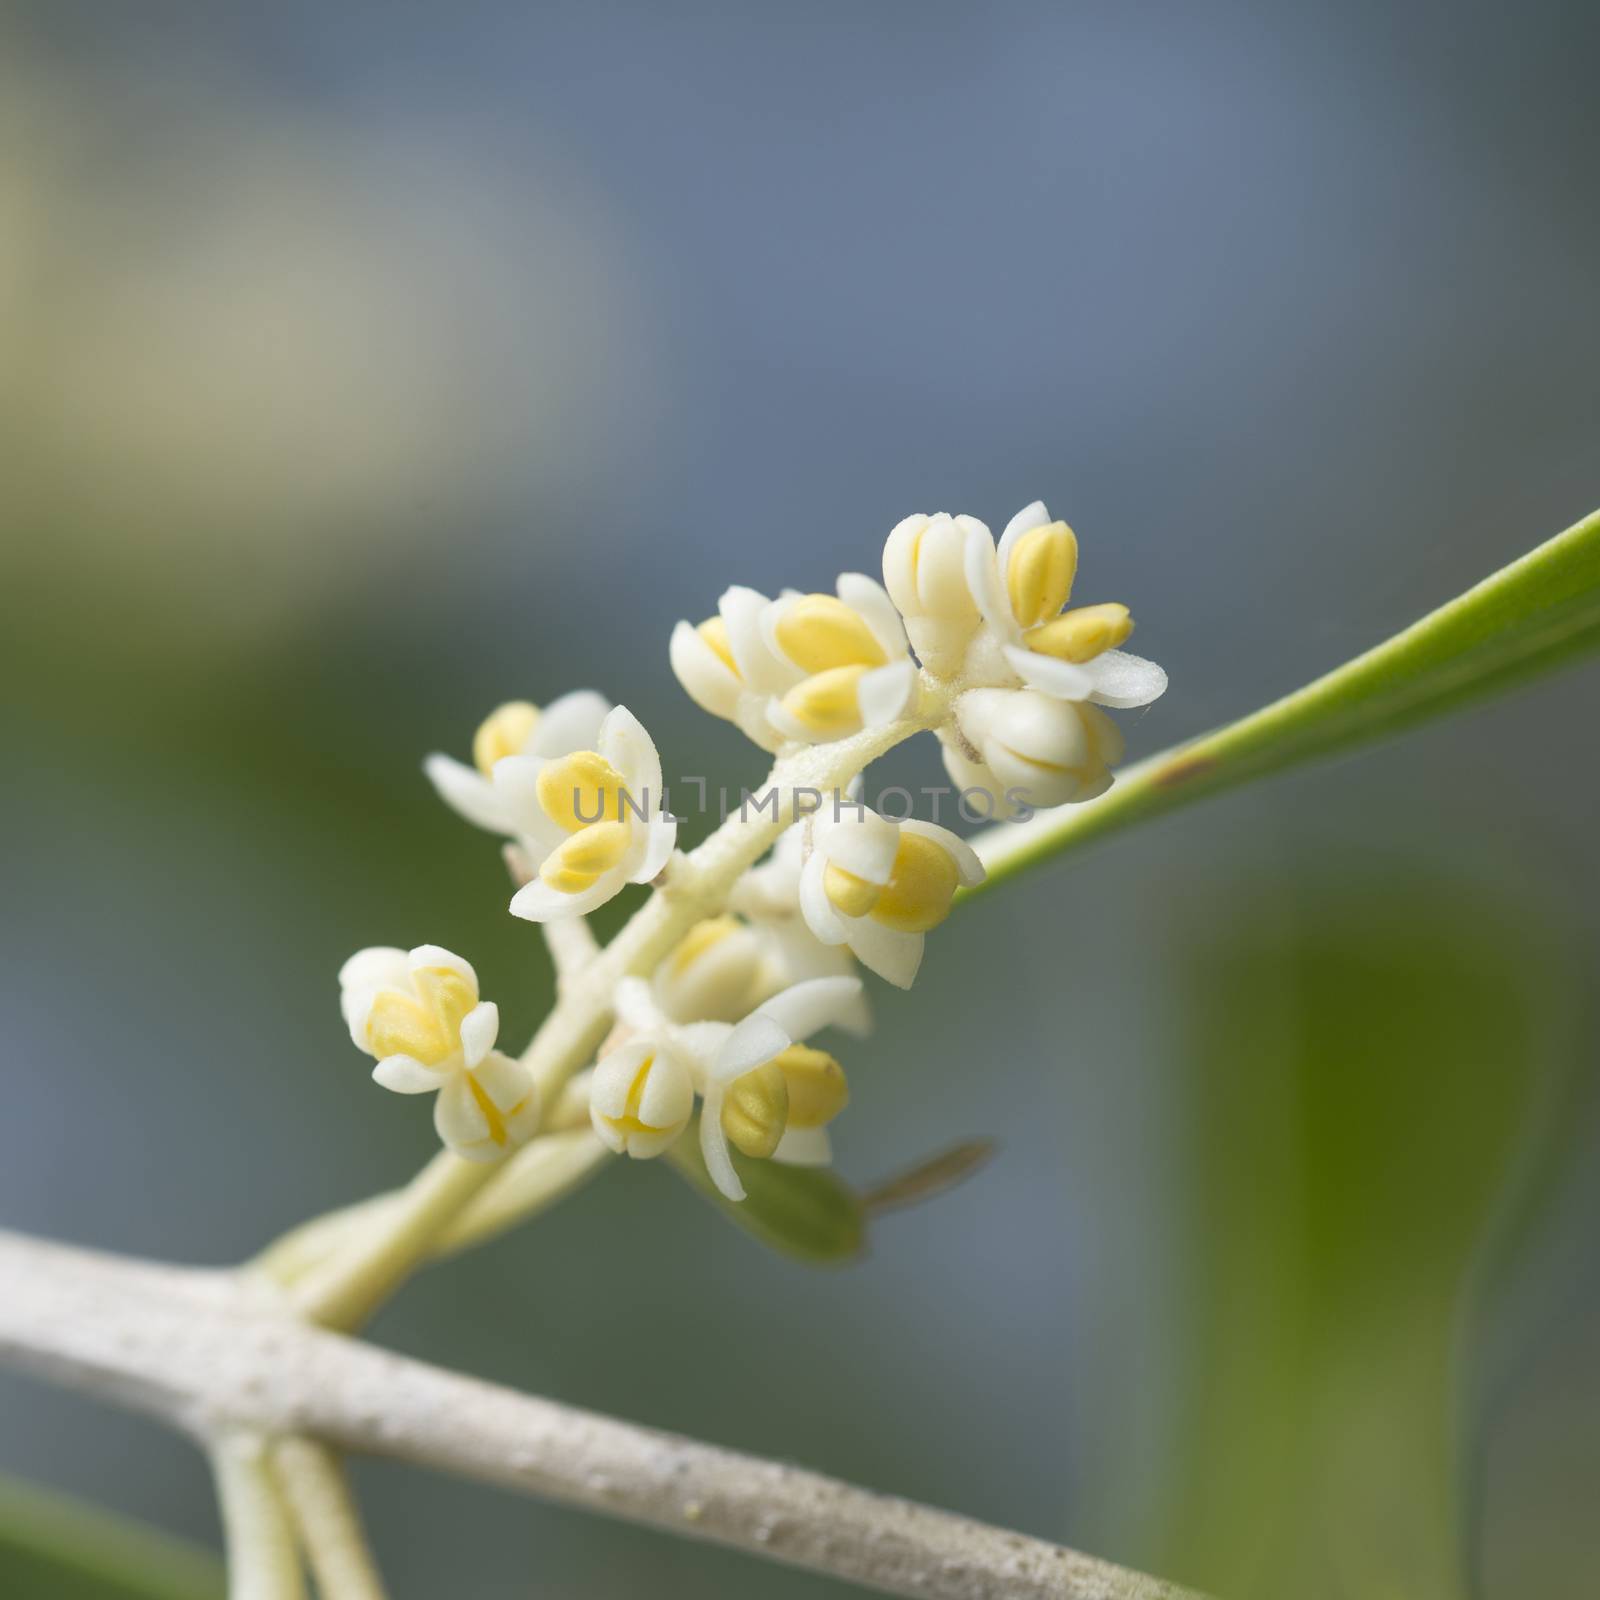 Details of olive tree flowers with blurry background.